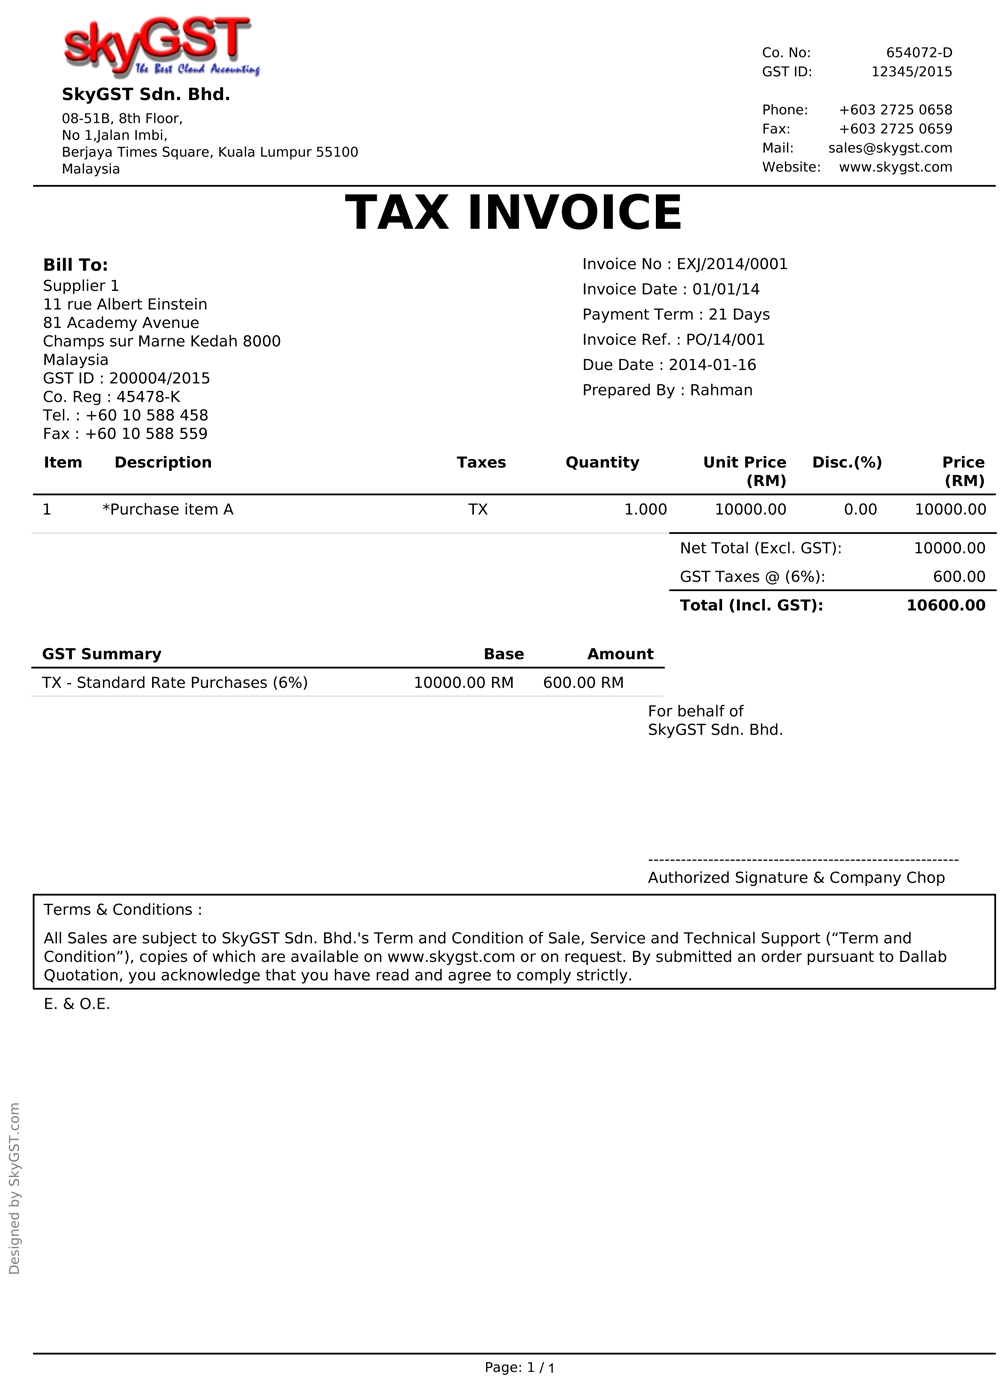 this tax invoice ok or not requirements of a tax invoice